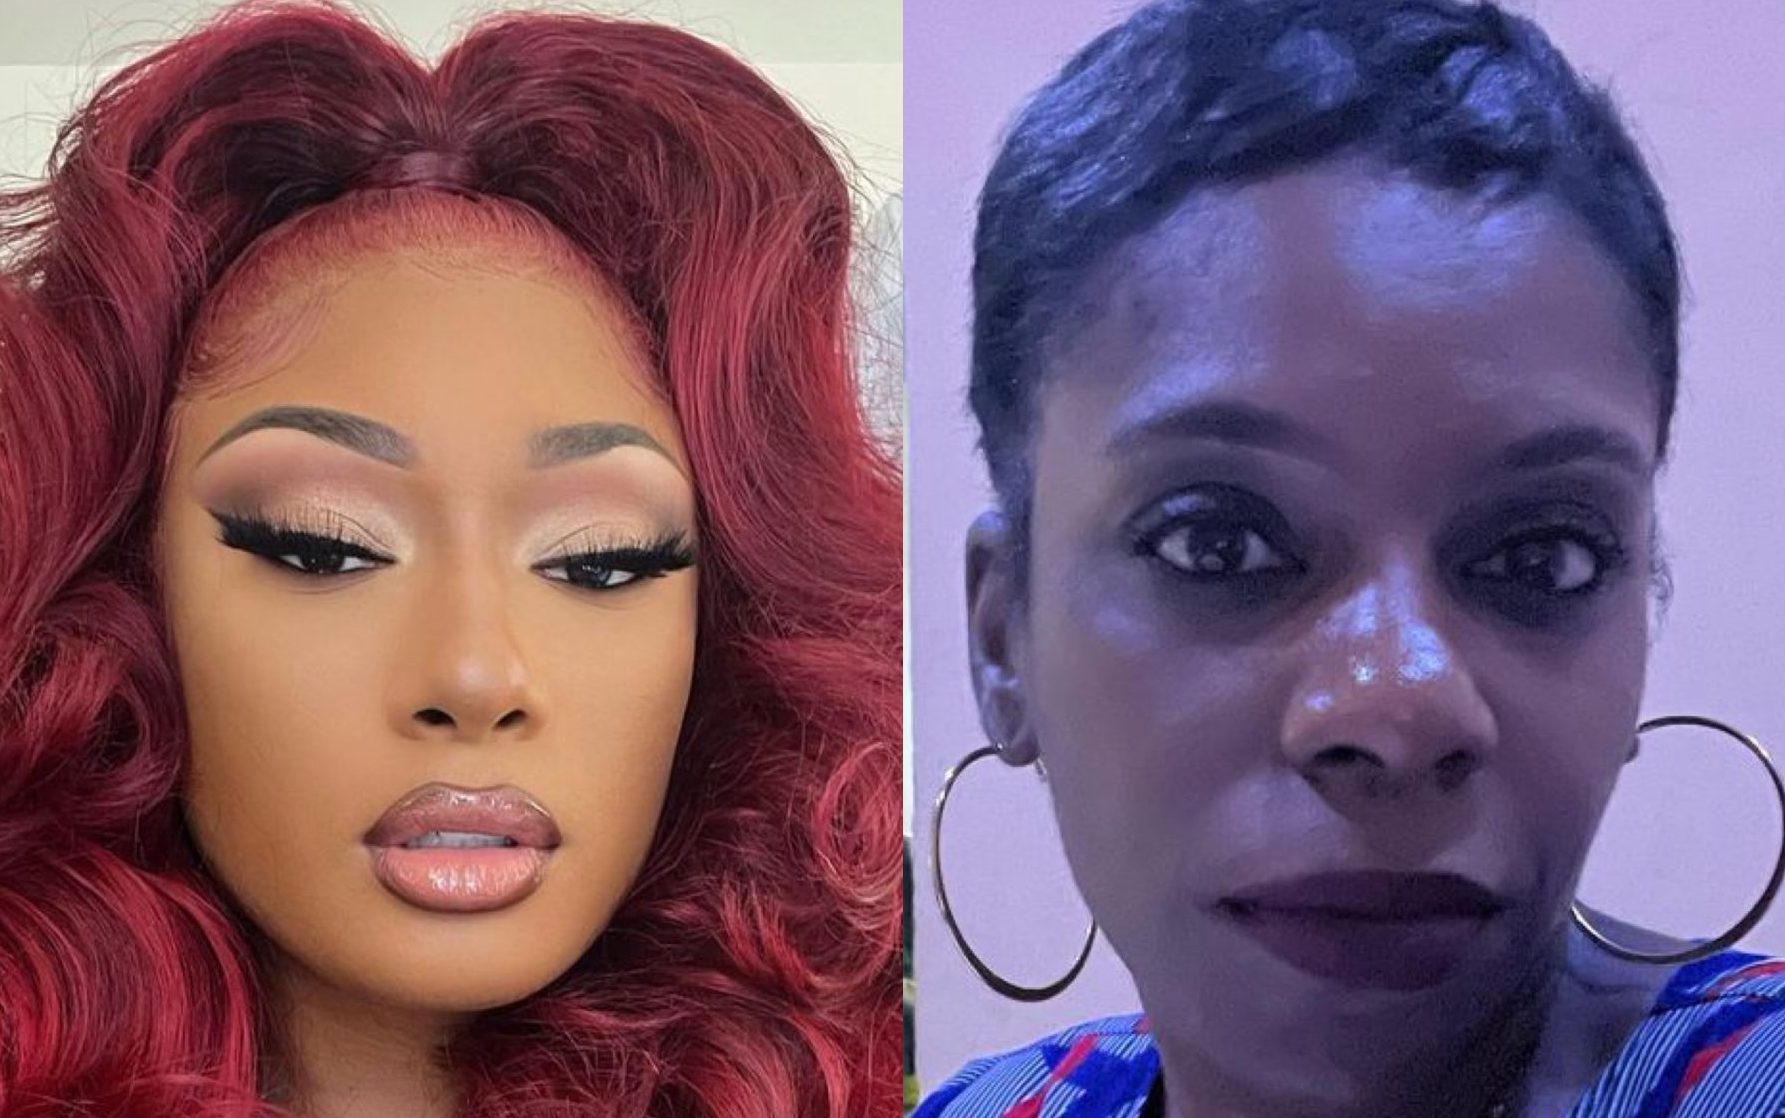 Megan Thee Stallion Seemingly Denies Allegations From Tasha K About Her Damaging Teyana Taylor’s Home